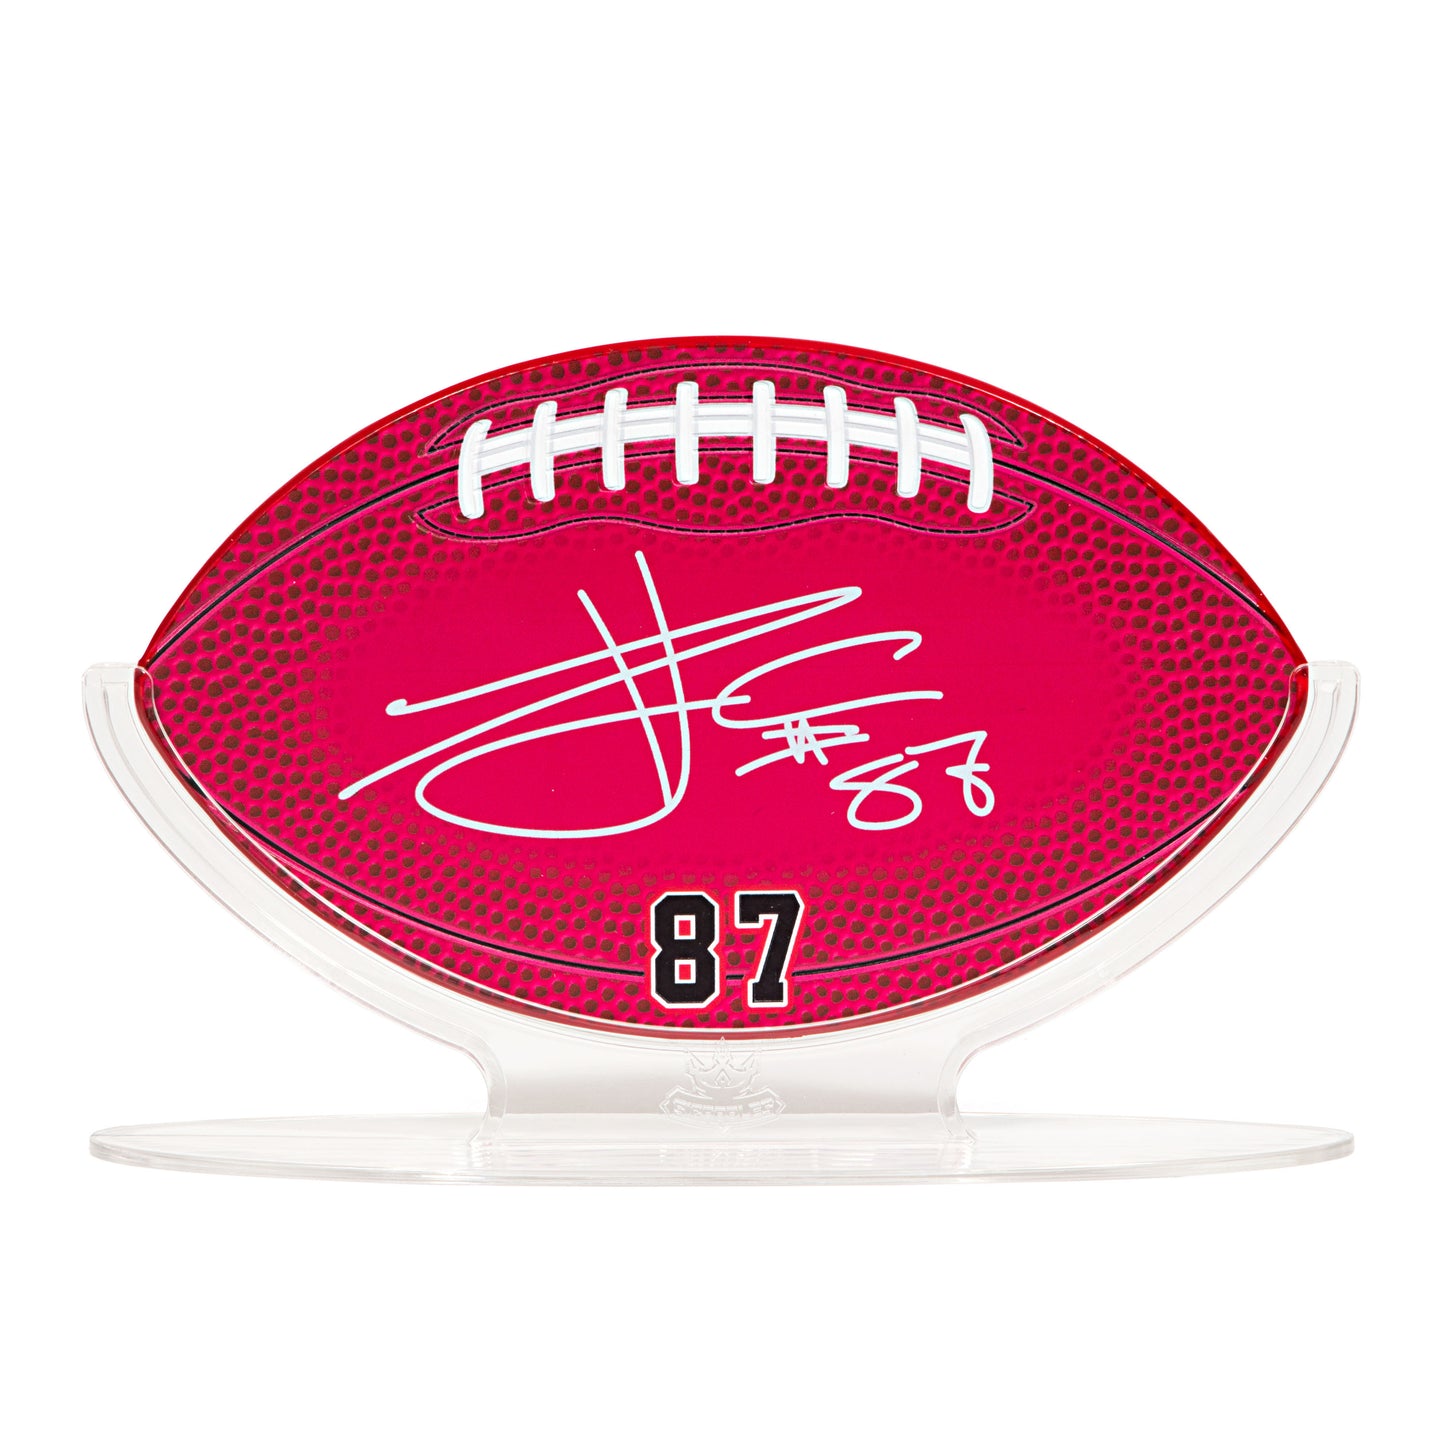 Travis Kelce   - NFLPA 2023 Signables Collectible